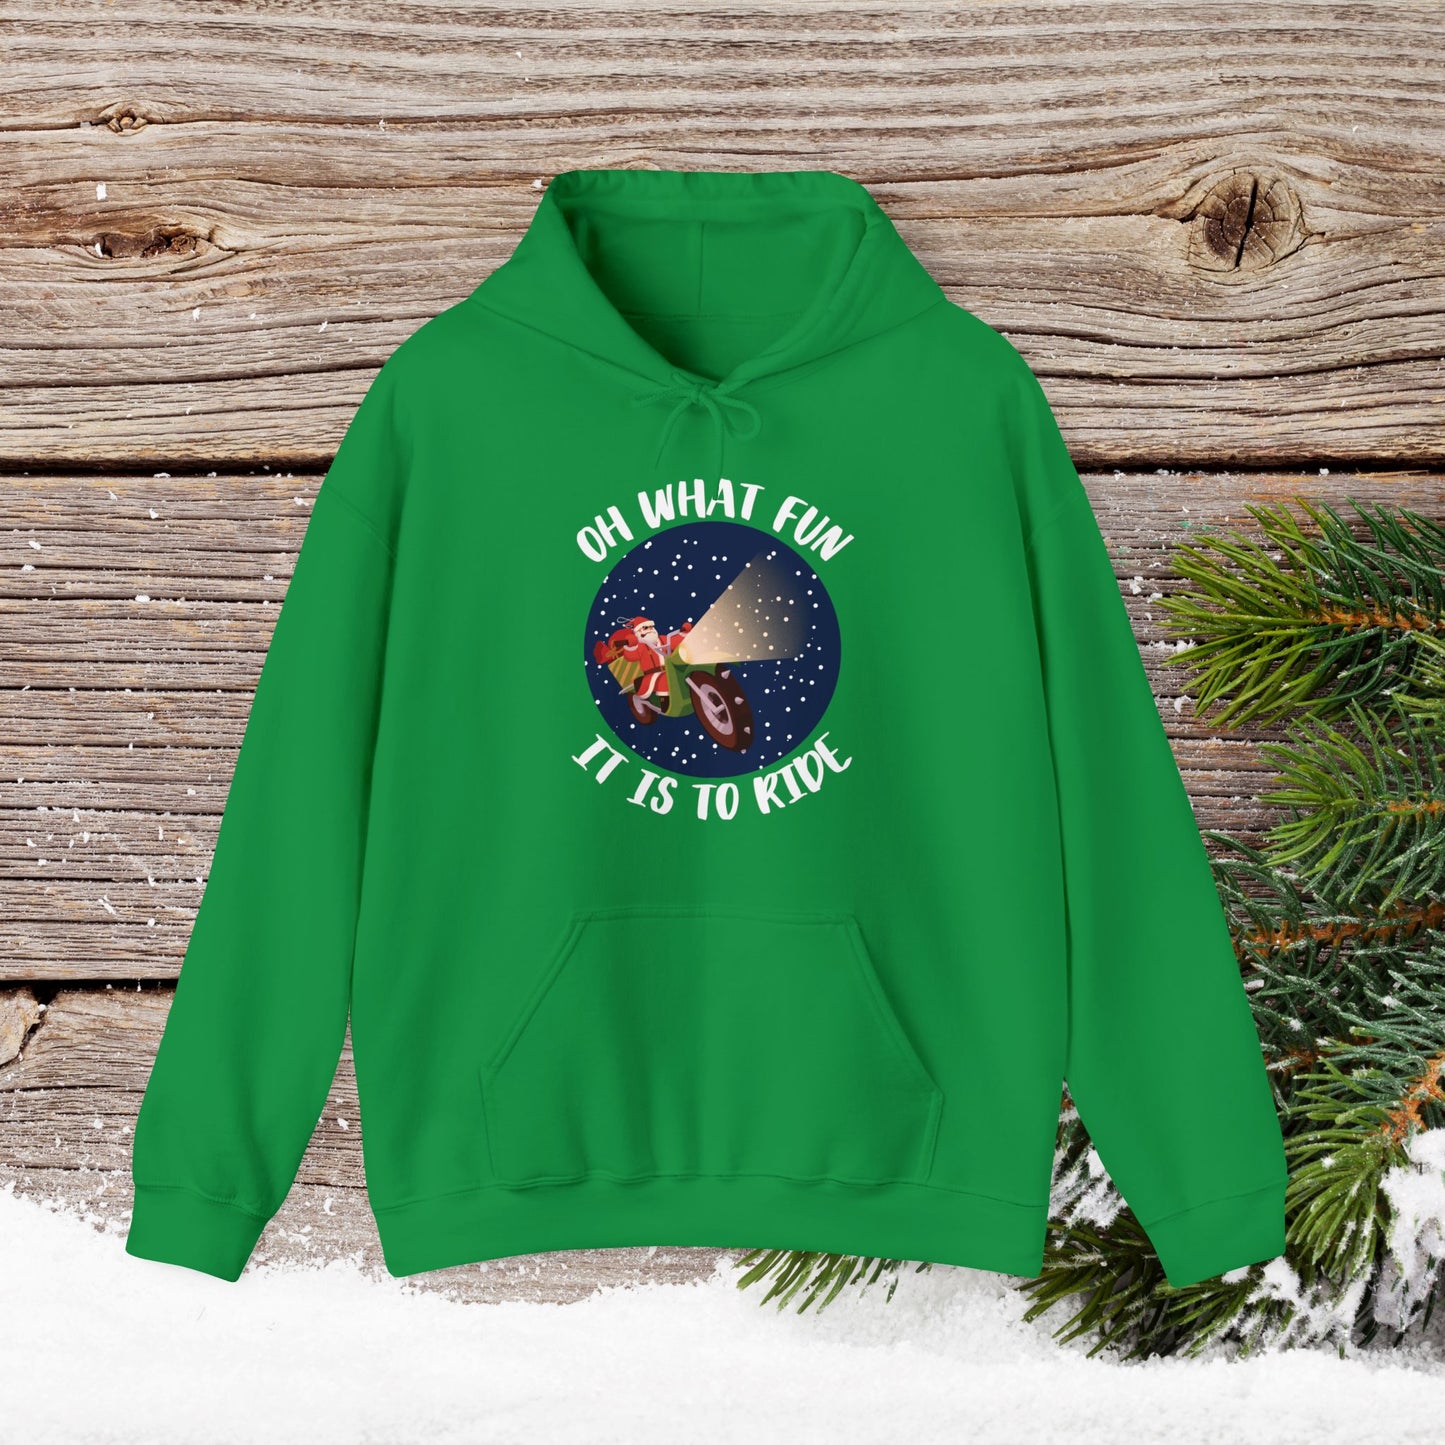 Christmas Hoodie - Oh What Fun It Is To Ride - Mens and Boys Christmas Shirts - Youth and Adult Christmas Hooded Sweatshirt Hooded Sweatshirt Graphic Avenue Irish Green Adult Small 